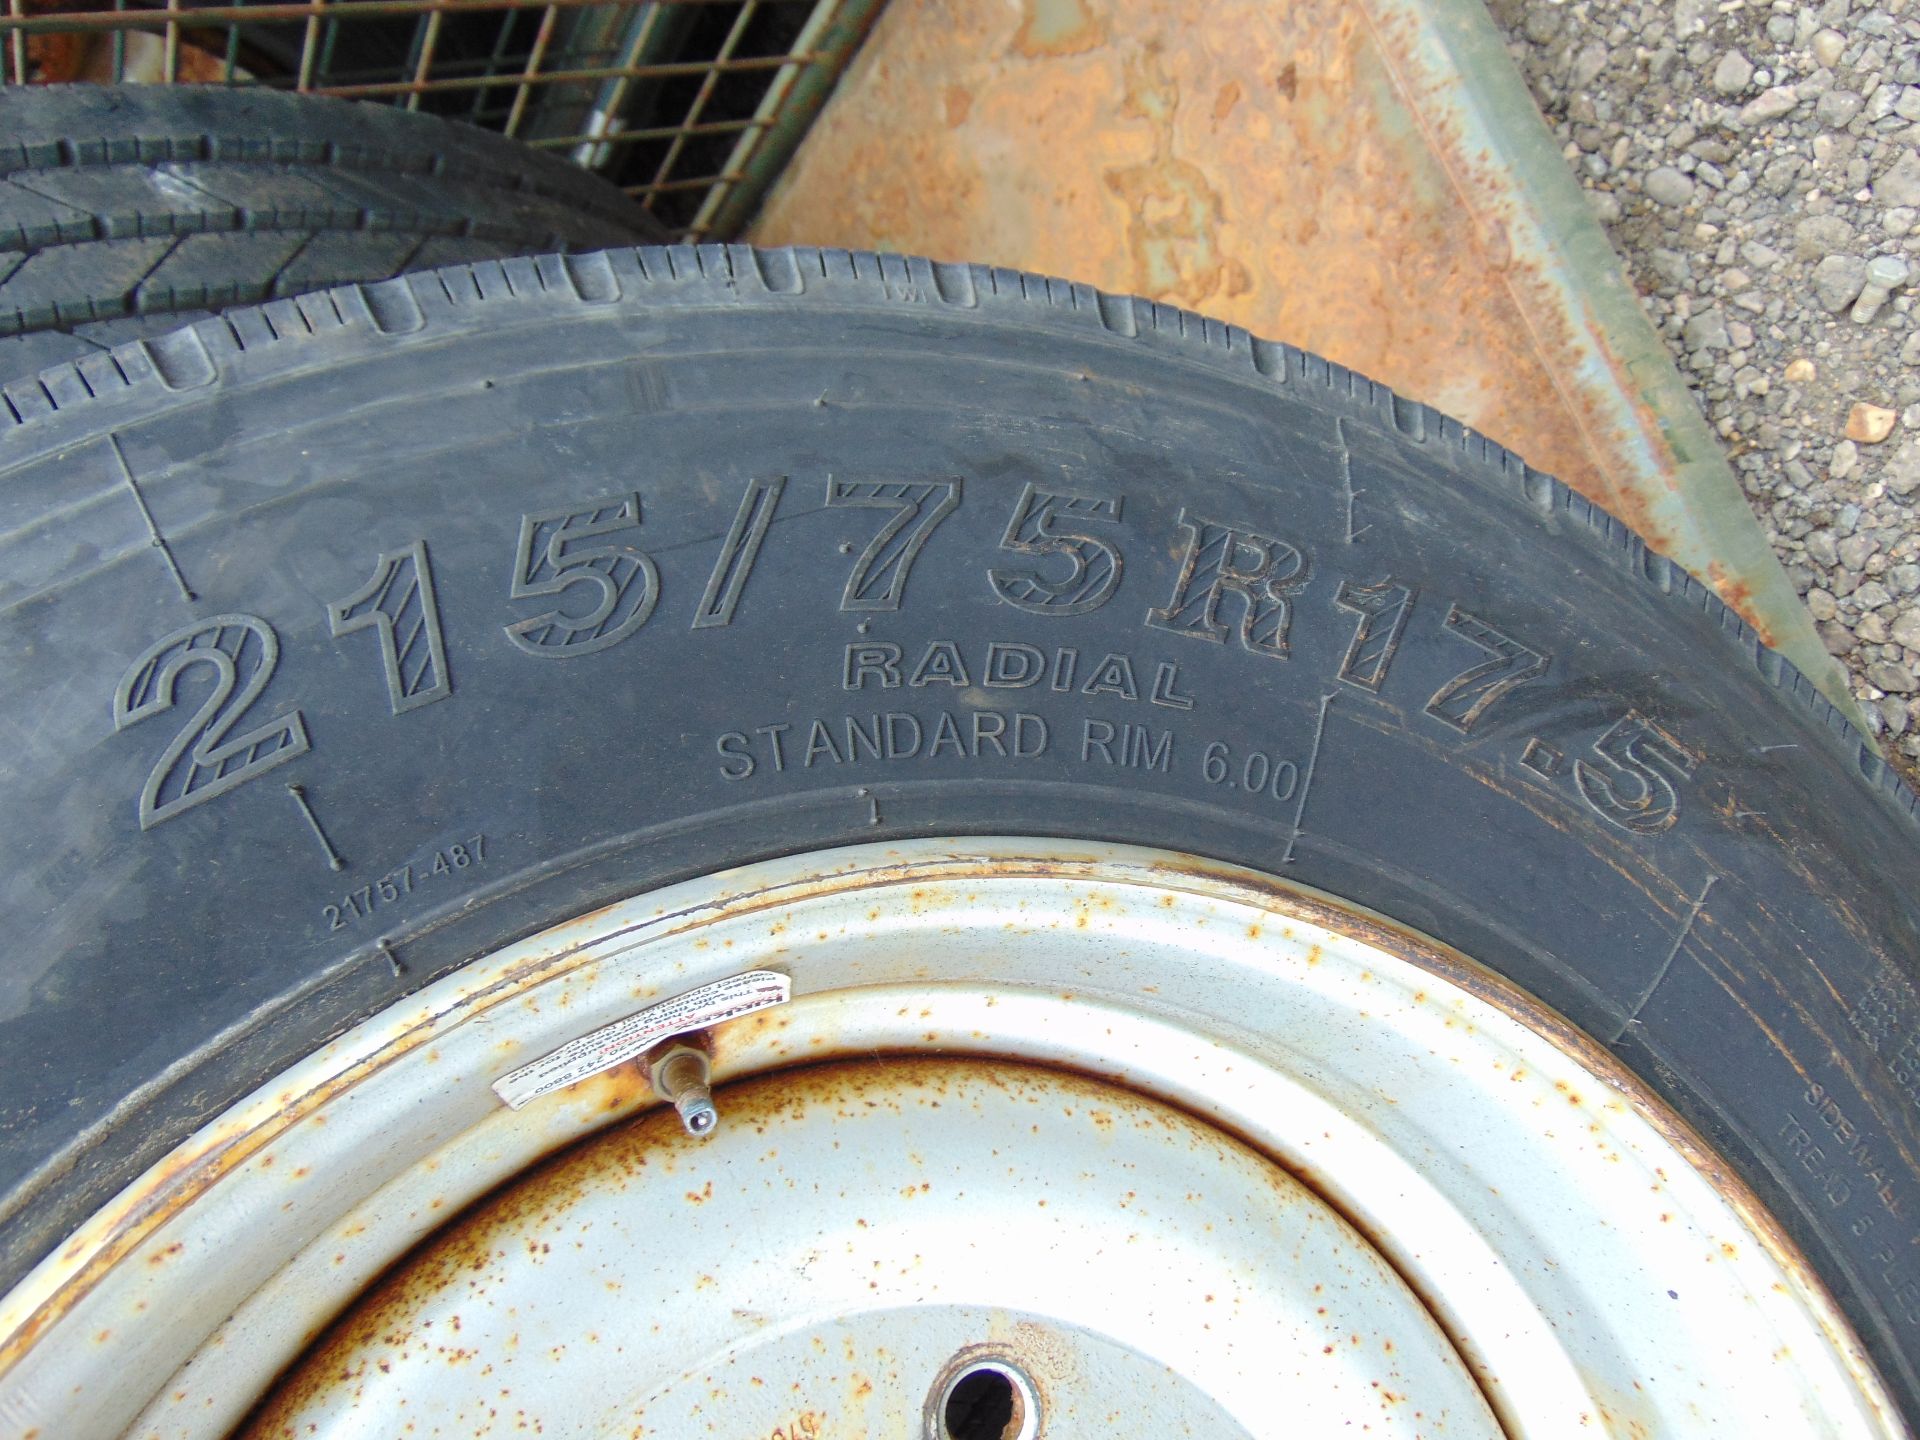 6 x Sailun S637 215/75 R17.5 Tyres with 6 Stud Rims - Image 5 of 7